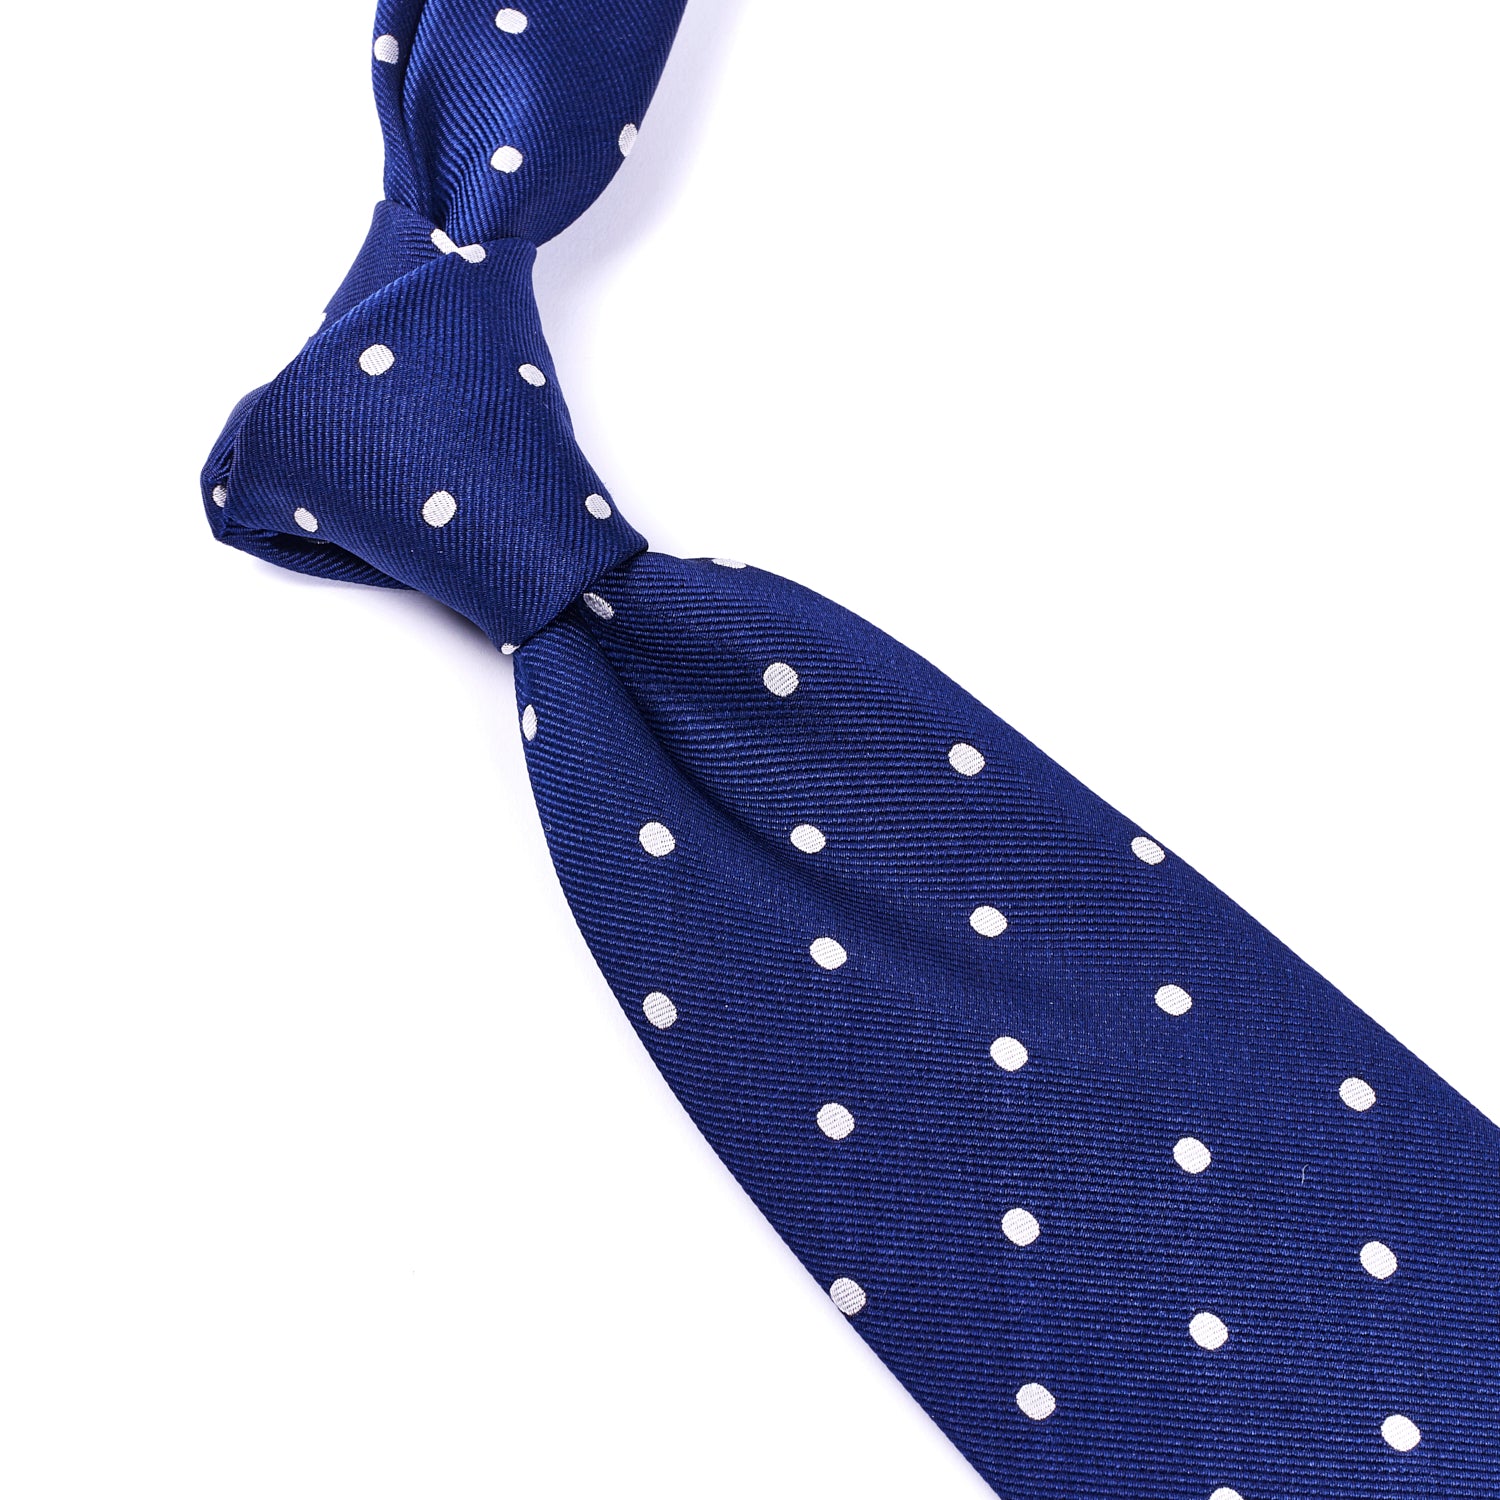 A KirbyAllison.com Sovereign Grade Woven Navy/White Wide Dot Tie, 150 cm on a white background.